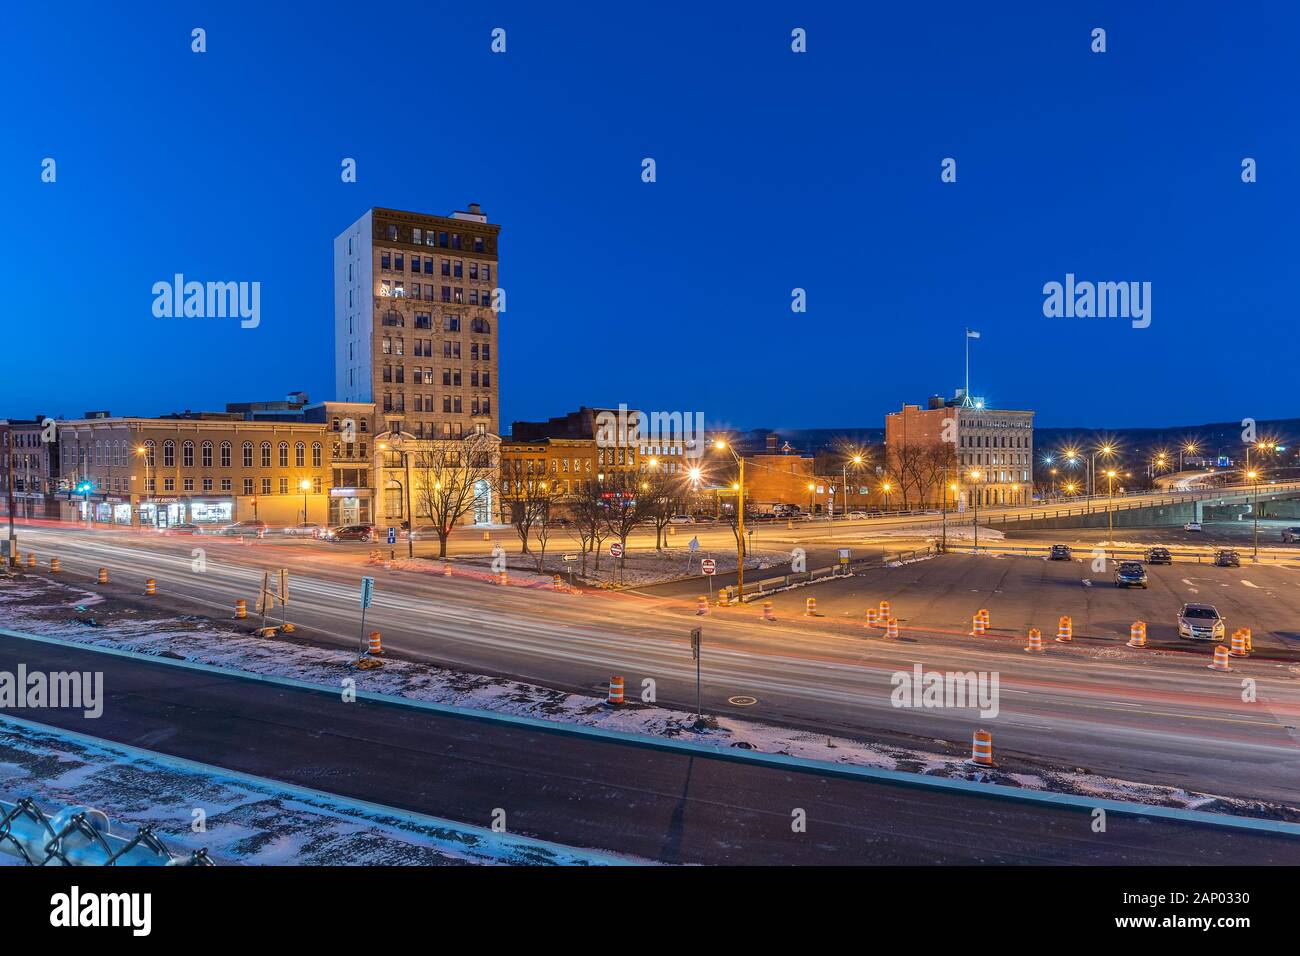 UTICA, NY - JAN 17, 2020: Wide Aerial Night View of Downtown Utica Streets and Cars Trail Lights with the Genesee Tower in the Background. Stock Photo